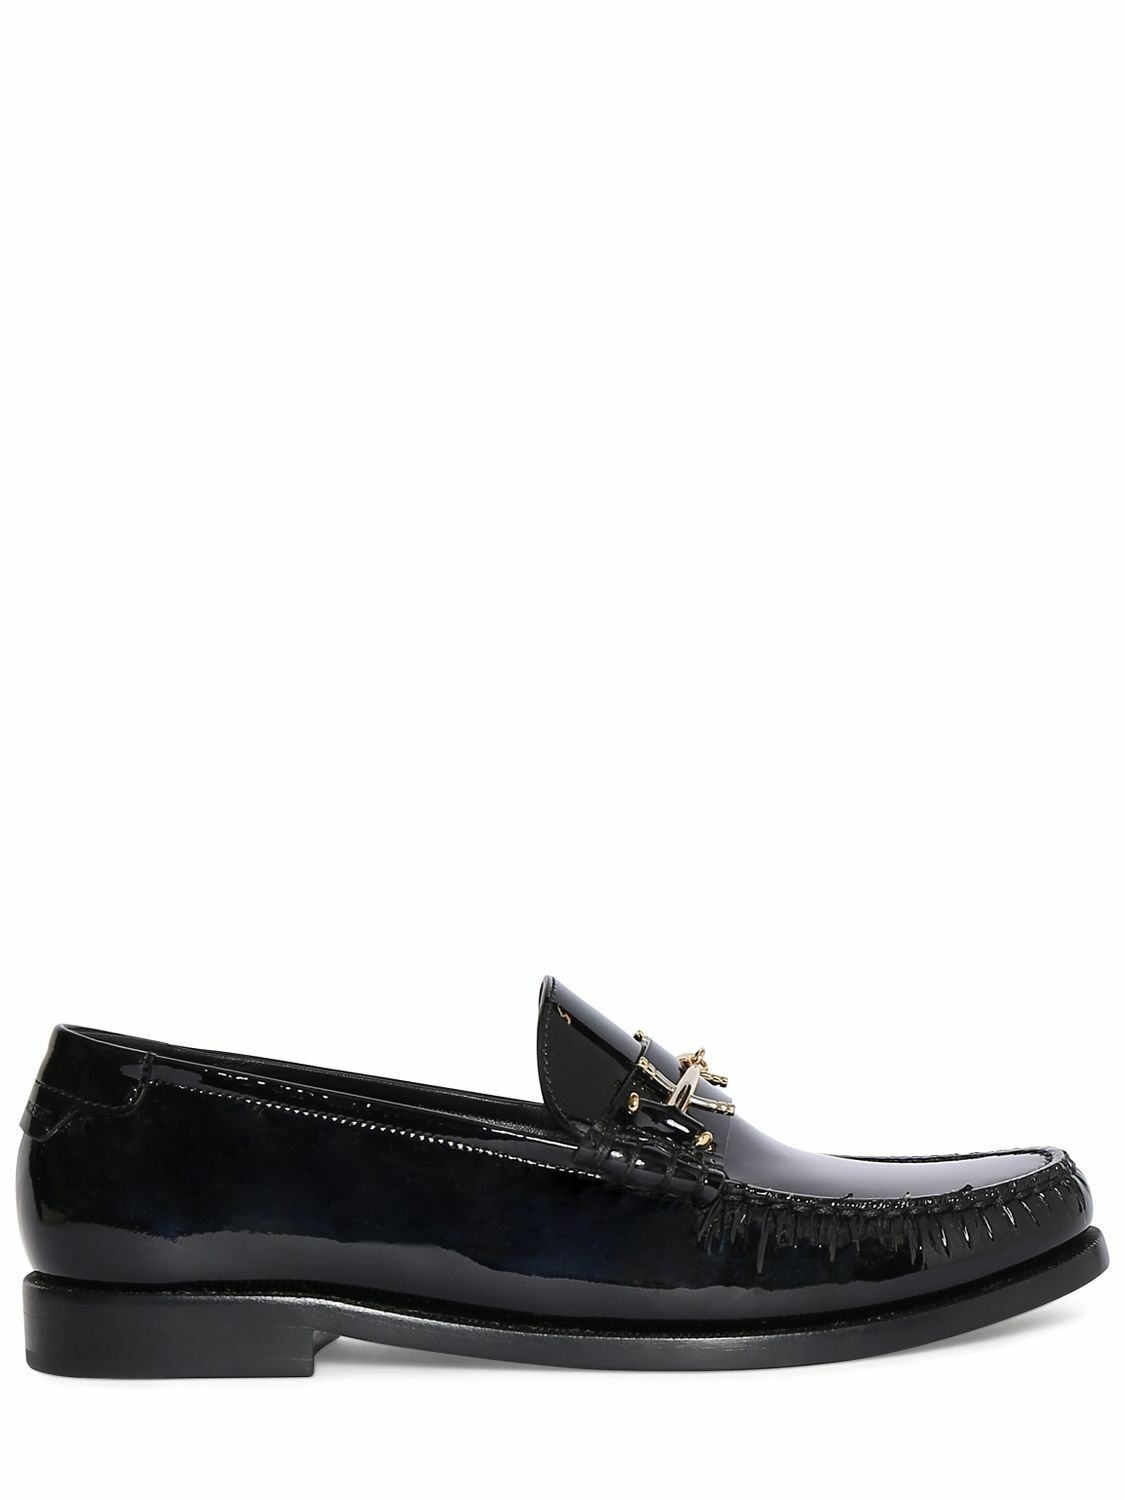 Photo: SAINT LAURENT - 15mm Le Loafer Patent Leather Loafers